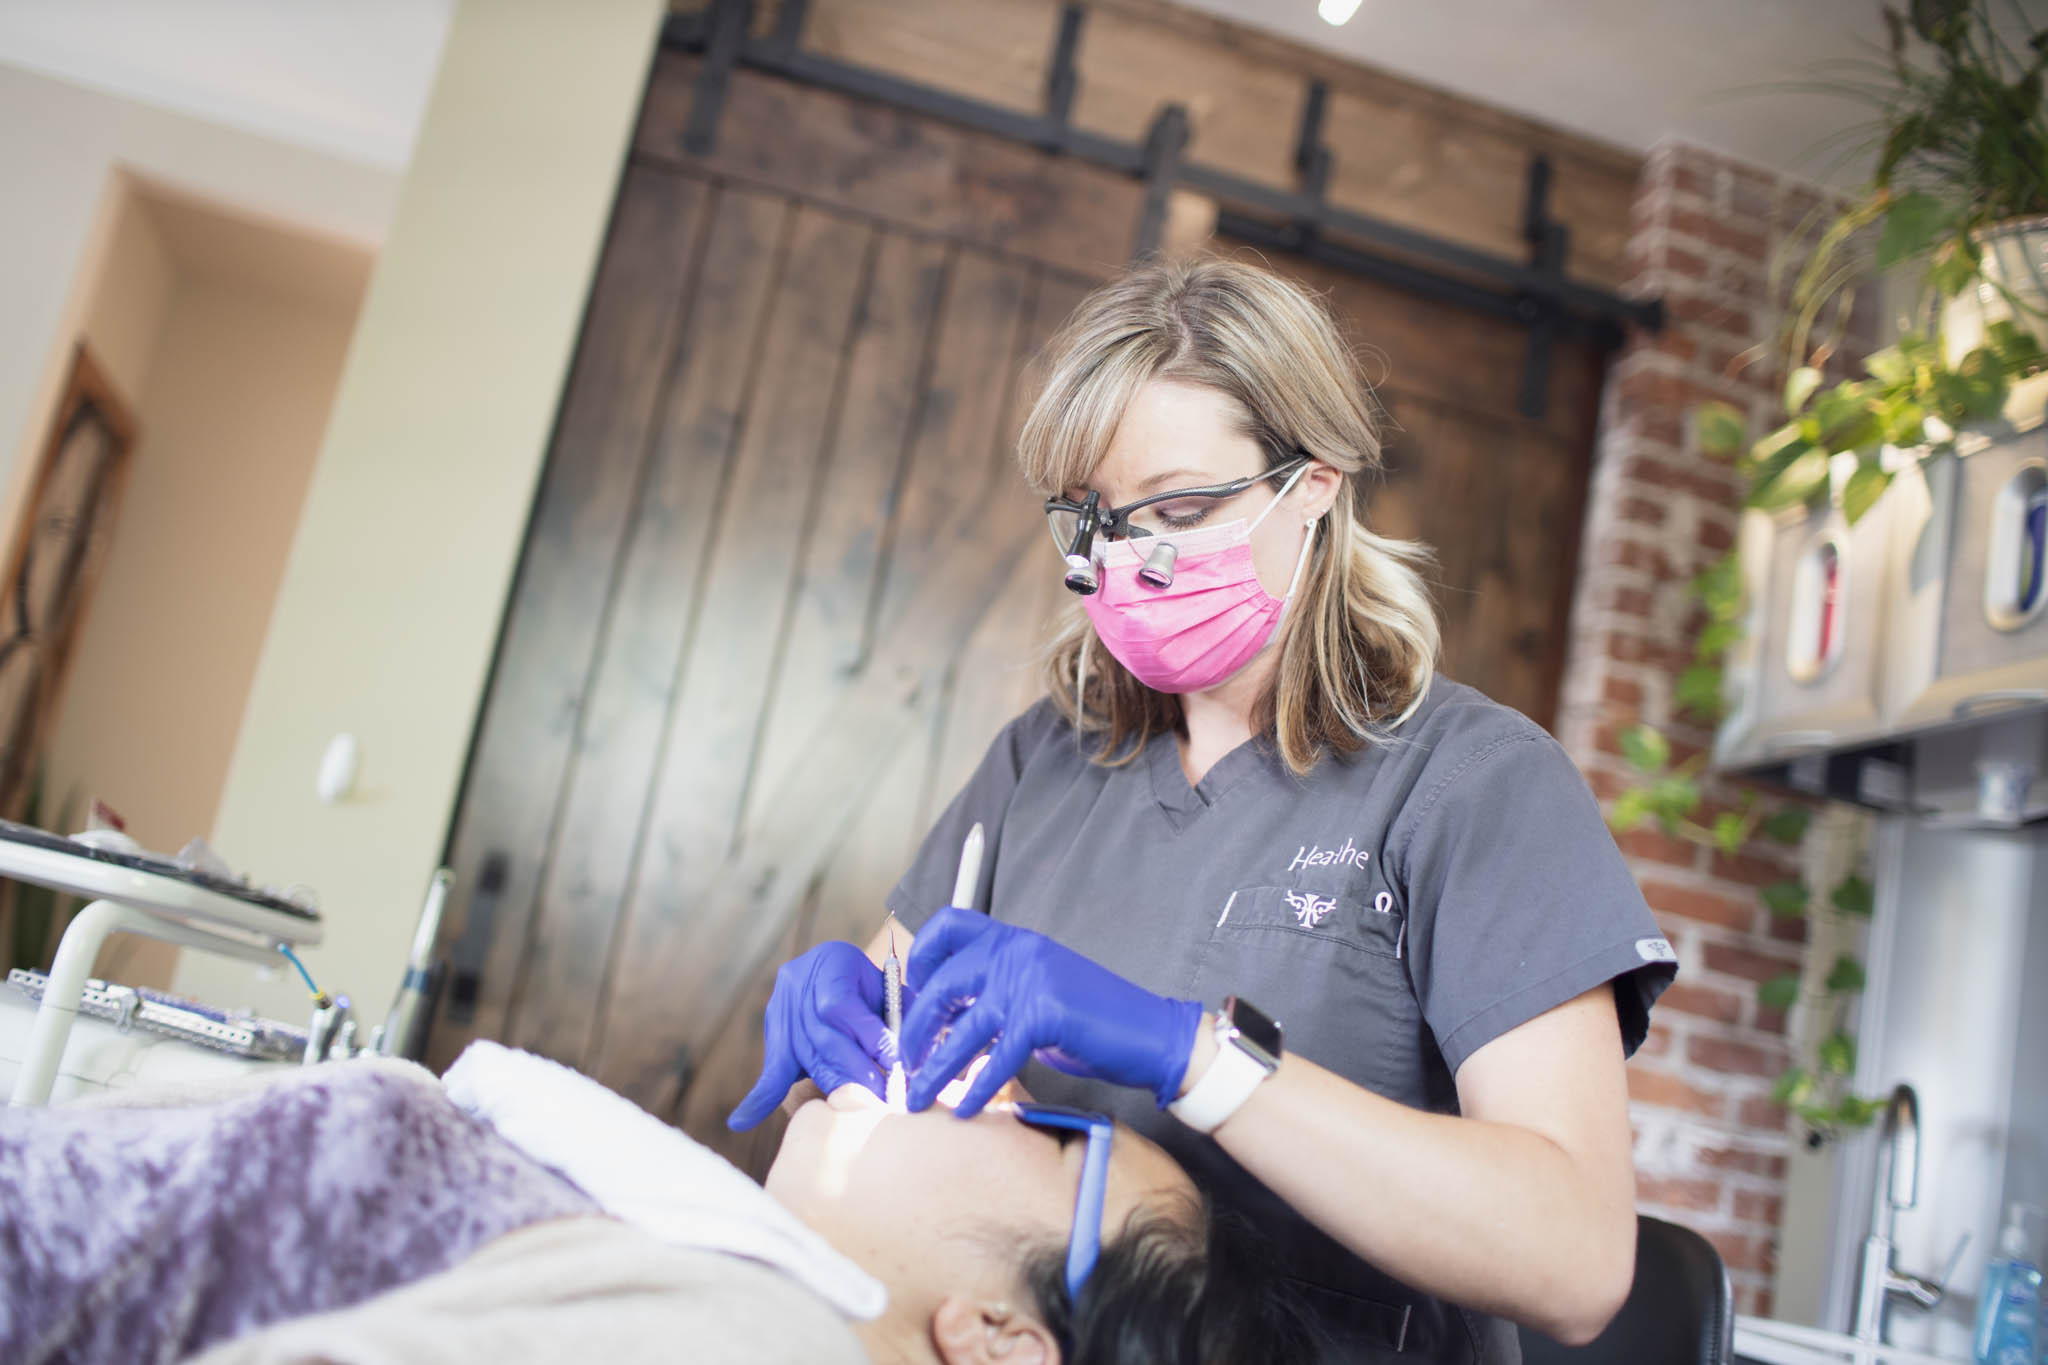 Editorial photo of dental professional working with a patient at a practice